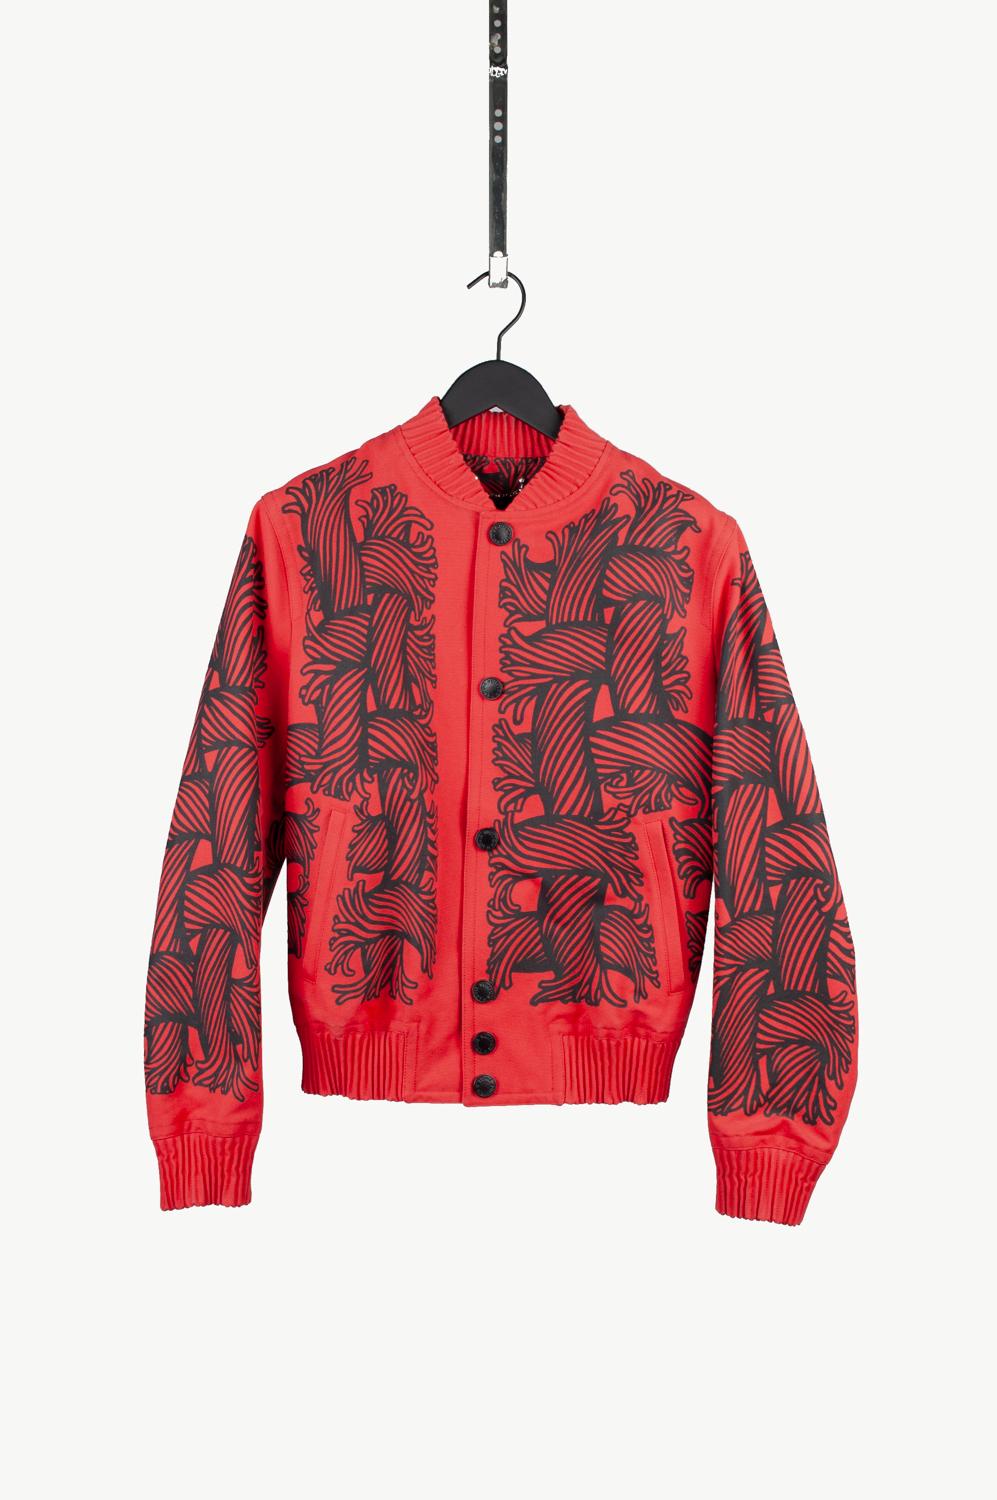 100% genuine Louis Vuitton Rope Heavy Bomber
Color: red
(An actual color may a bit vary due to individual computer screen interpretation)
Material: 100% cotton (no care tag)
Tag size: ITA48, runs Medium
This jacket is great quality item. Rate 8,5 of